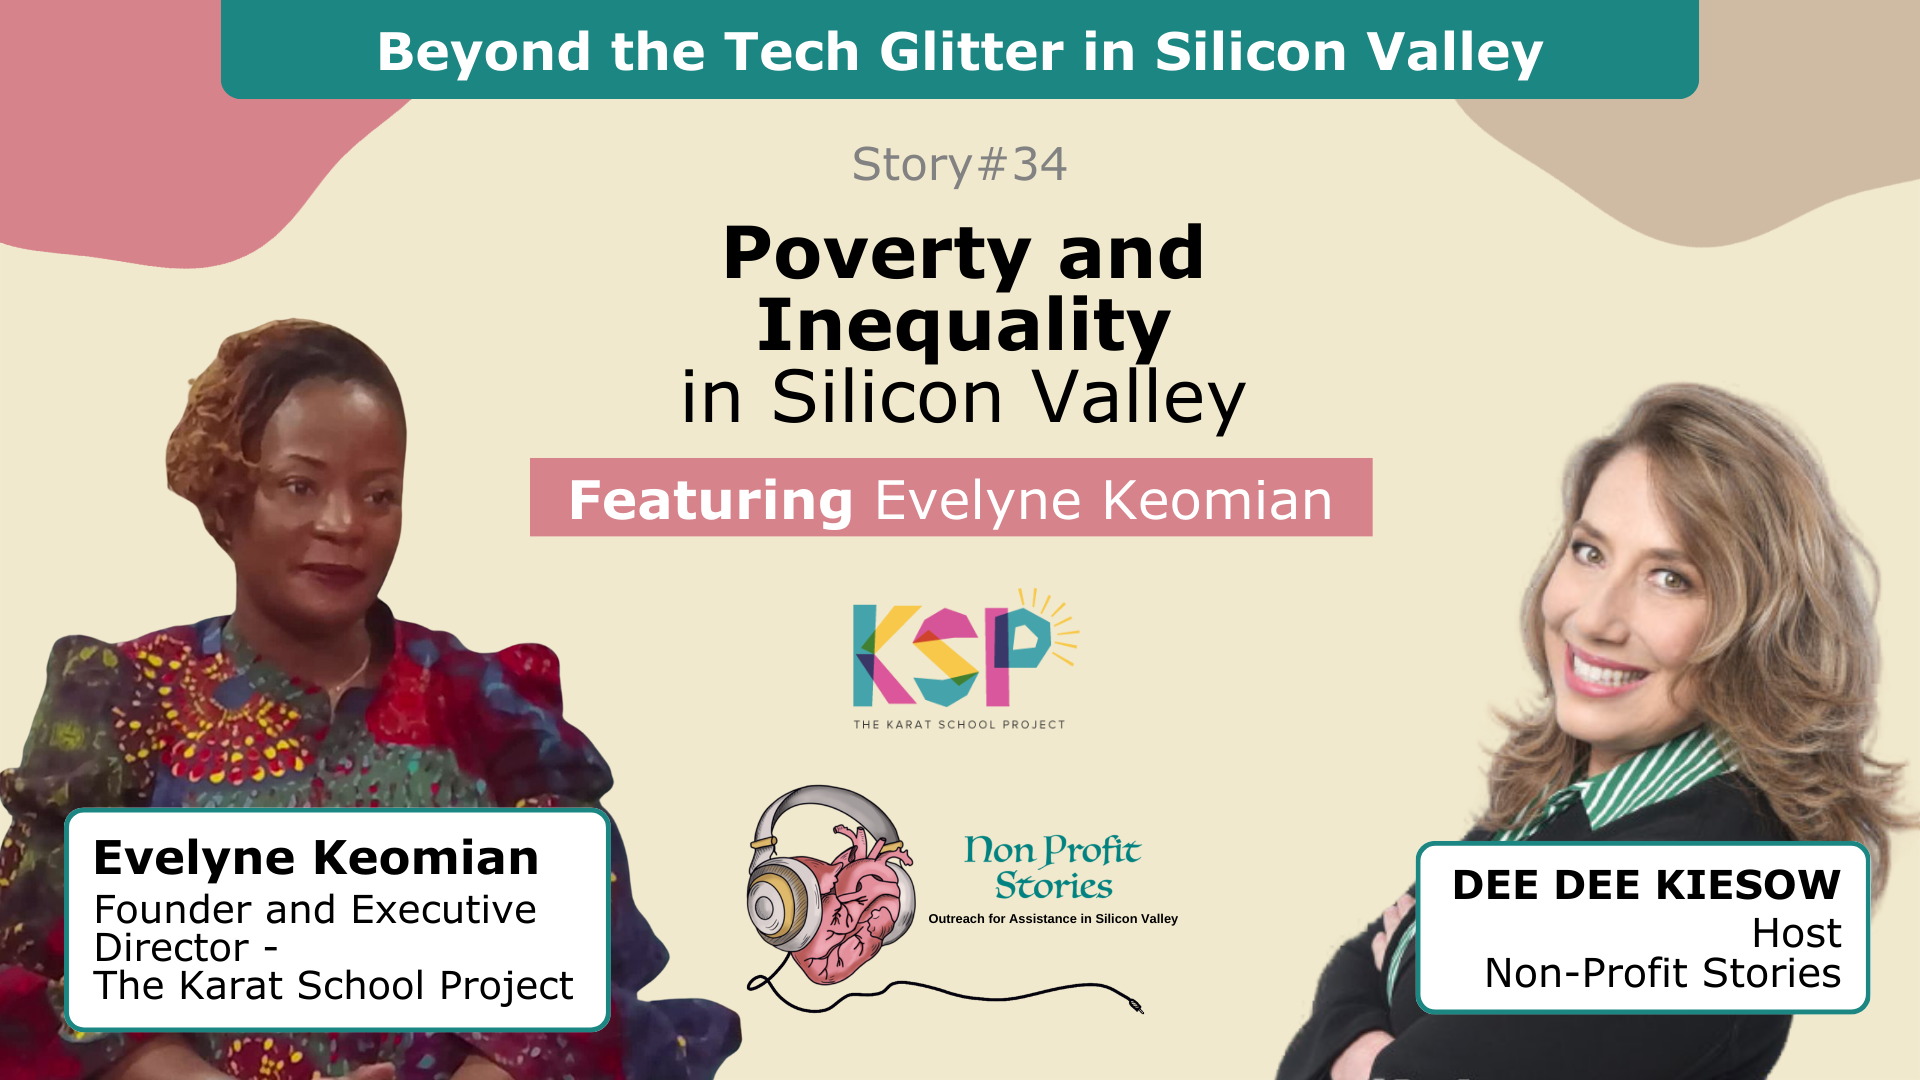 Poverty and Inequality: Beyond the Tech Glitter in Silicon Valley